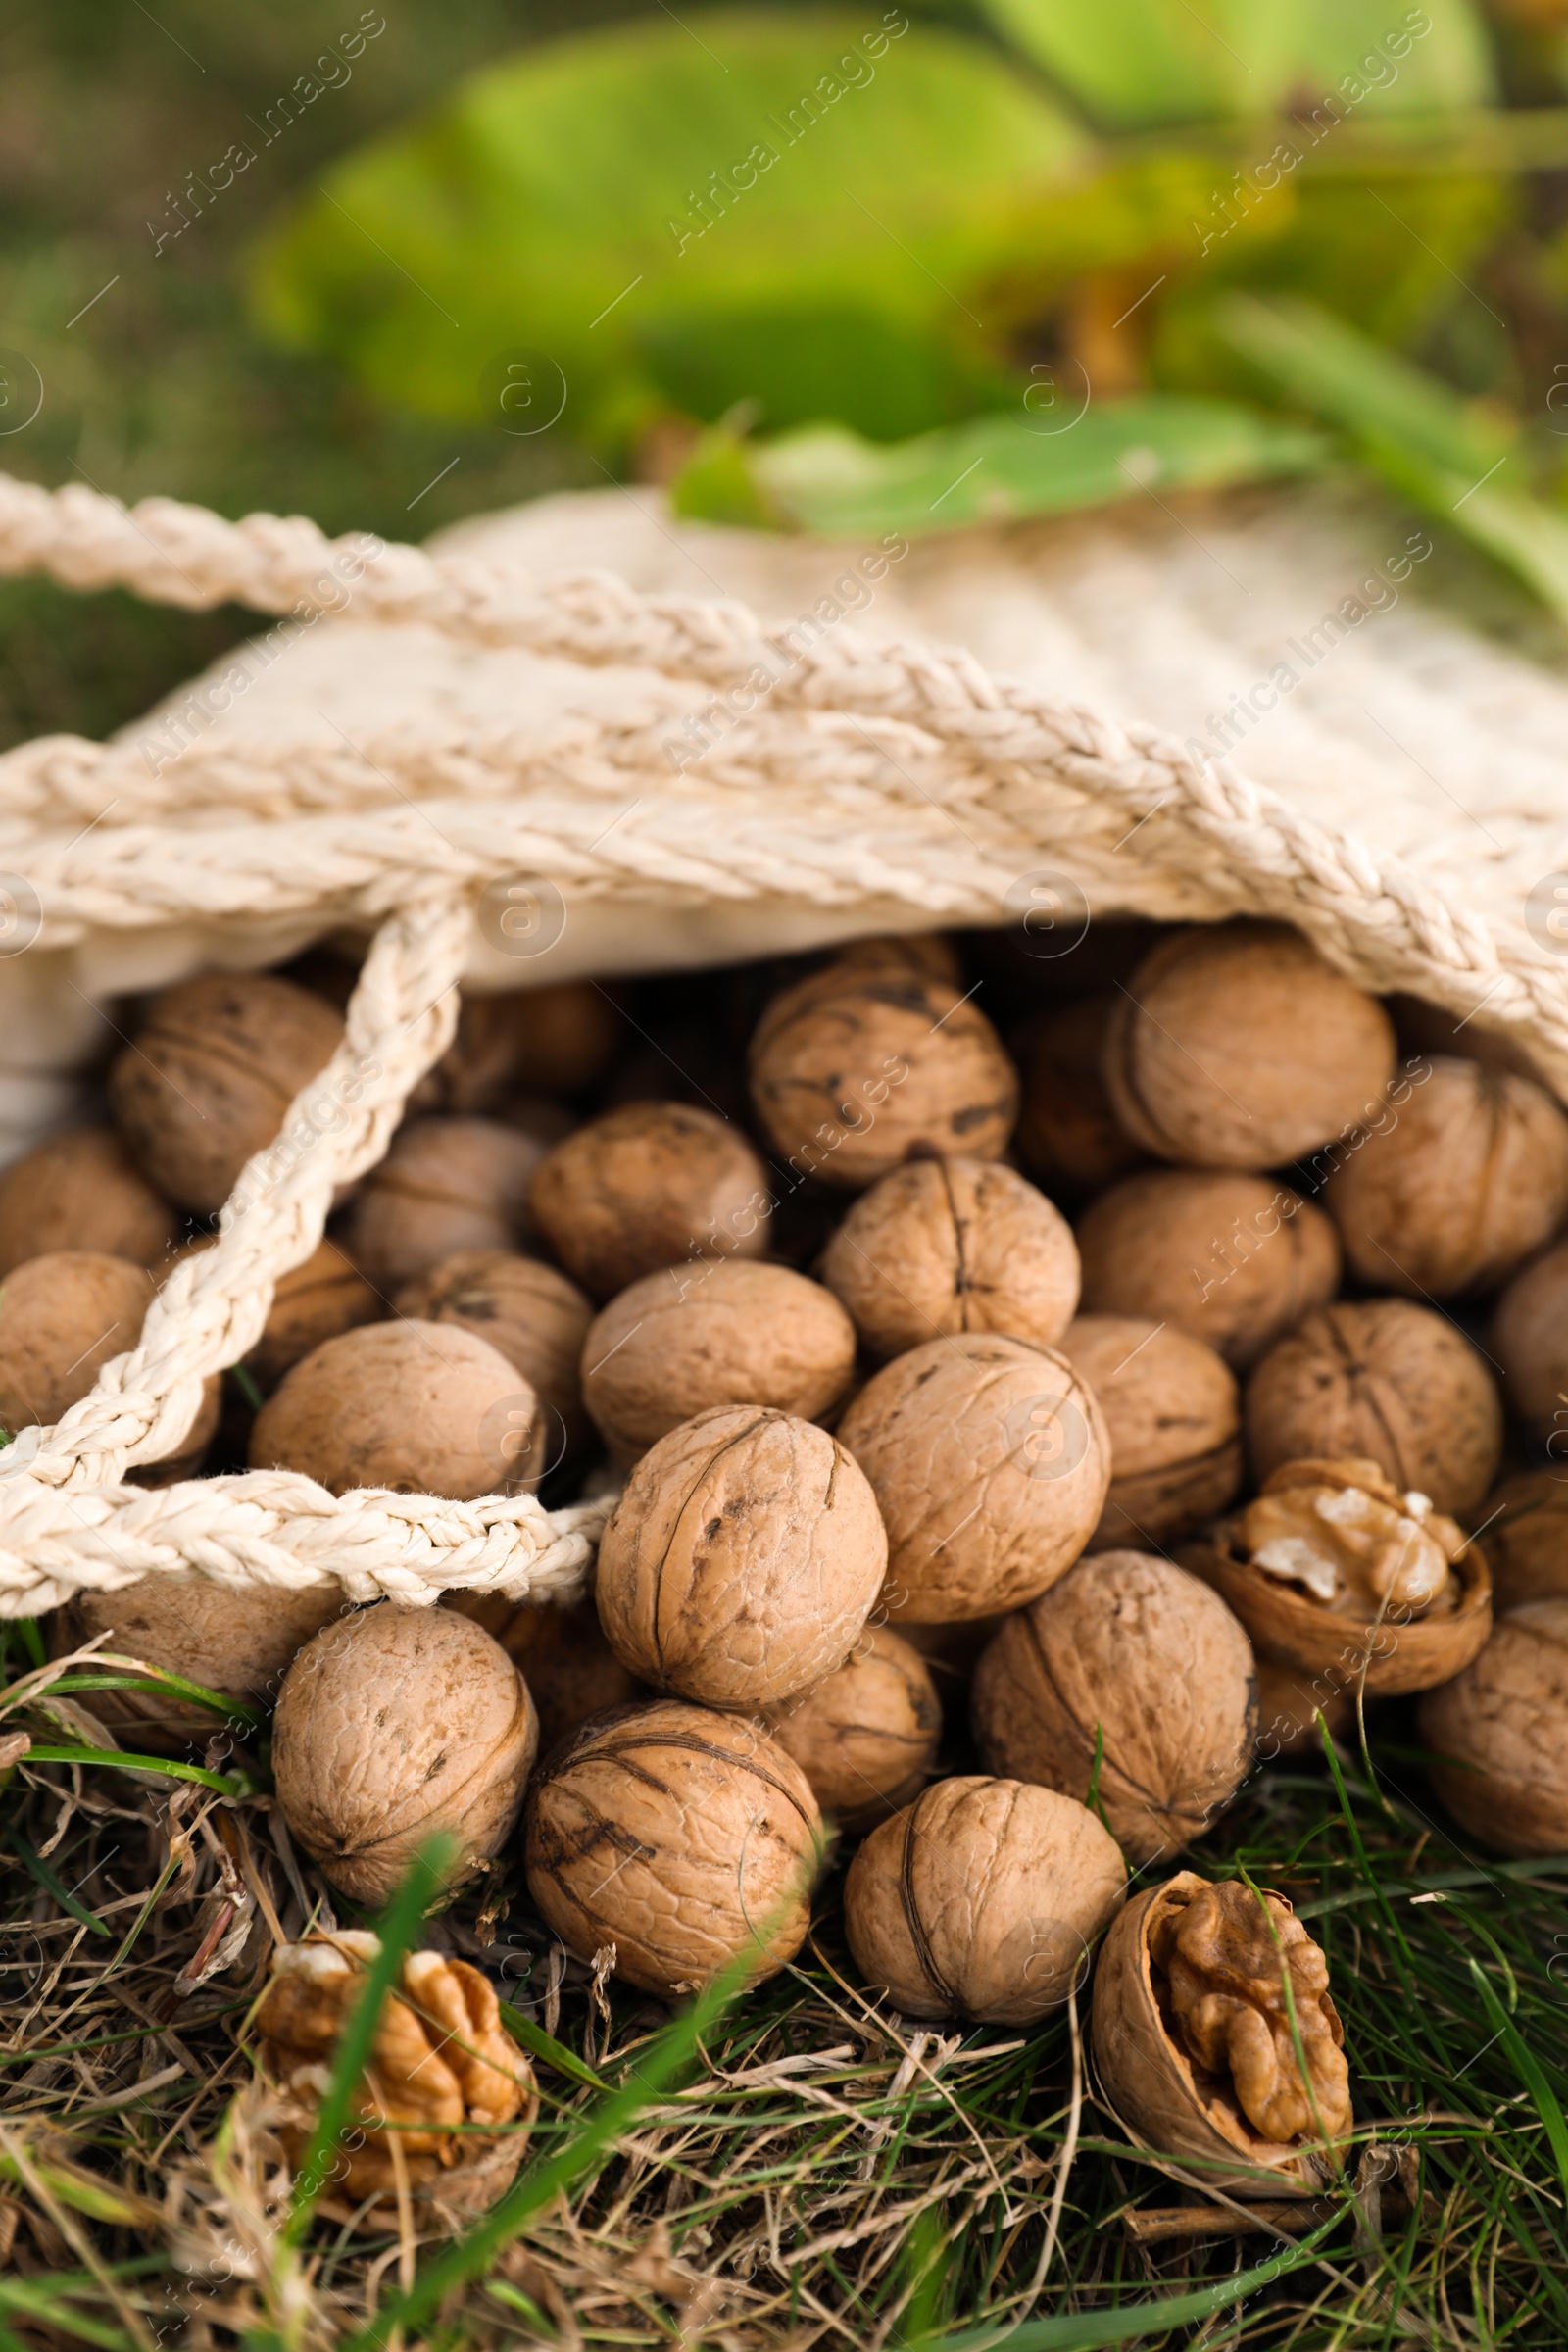 Photo of Overturned bag with walnuts on green grass outdoors, closeup